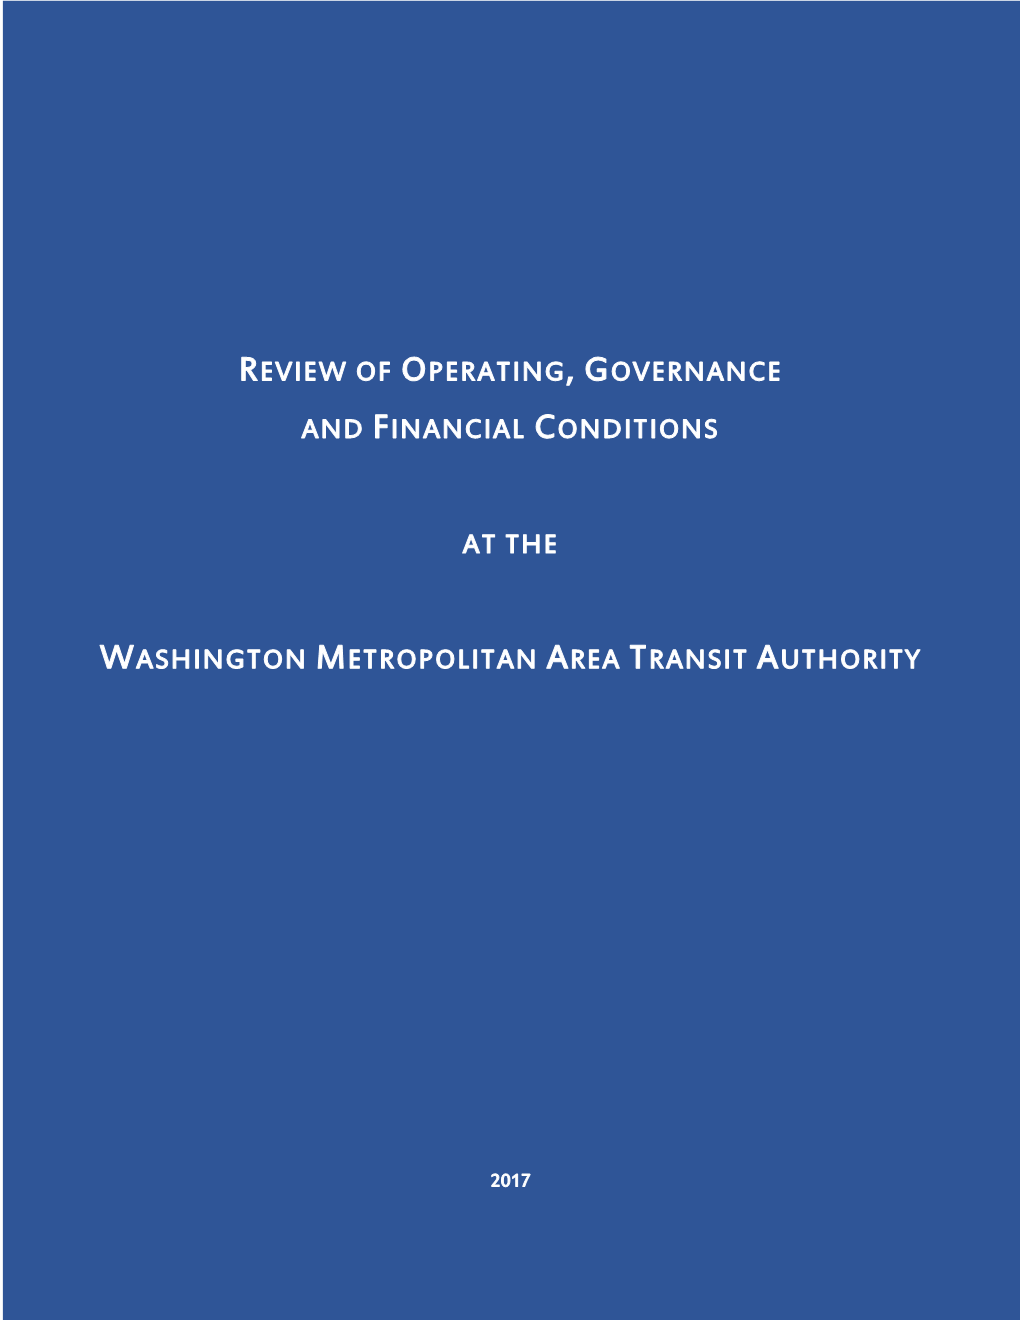 Review of Operating, Governance and Financial Conditions at the Washington Metropolitan Area Transit Authority